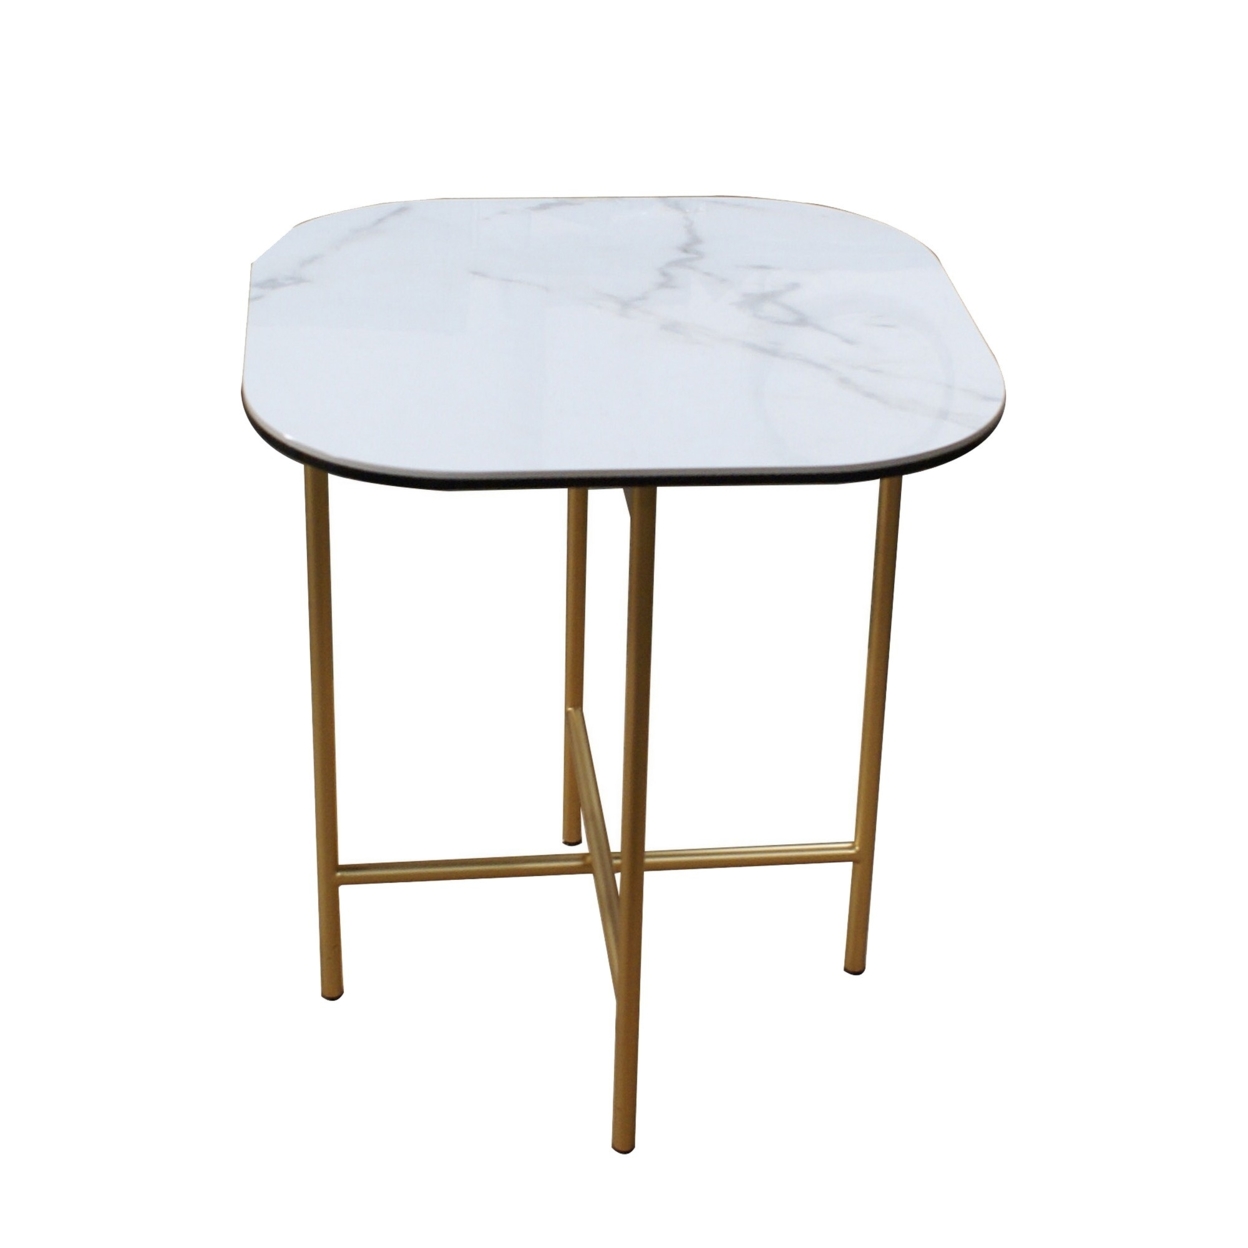 End Table With Ceramic Top And Metal Frame, White And Gold- Saltoro Sherpi